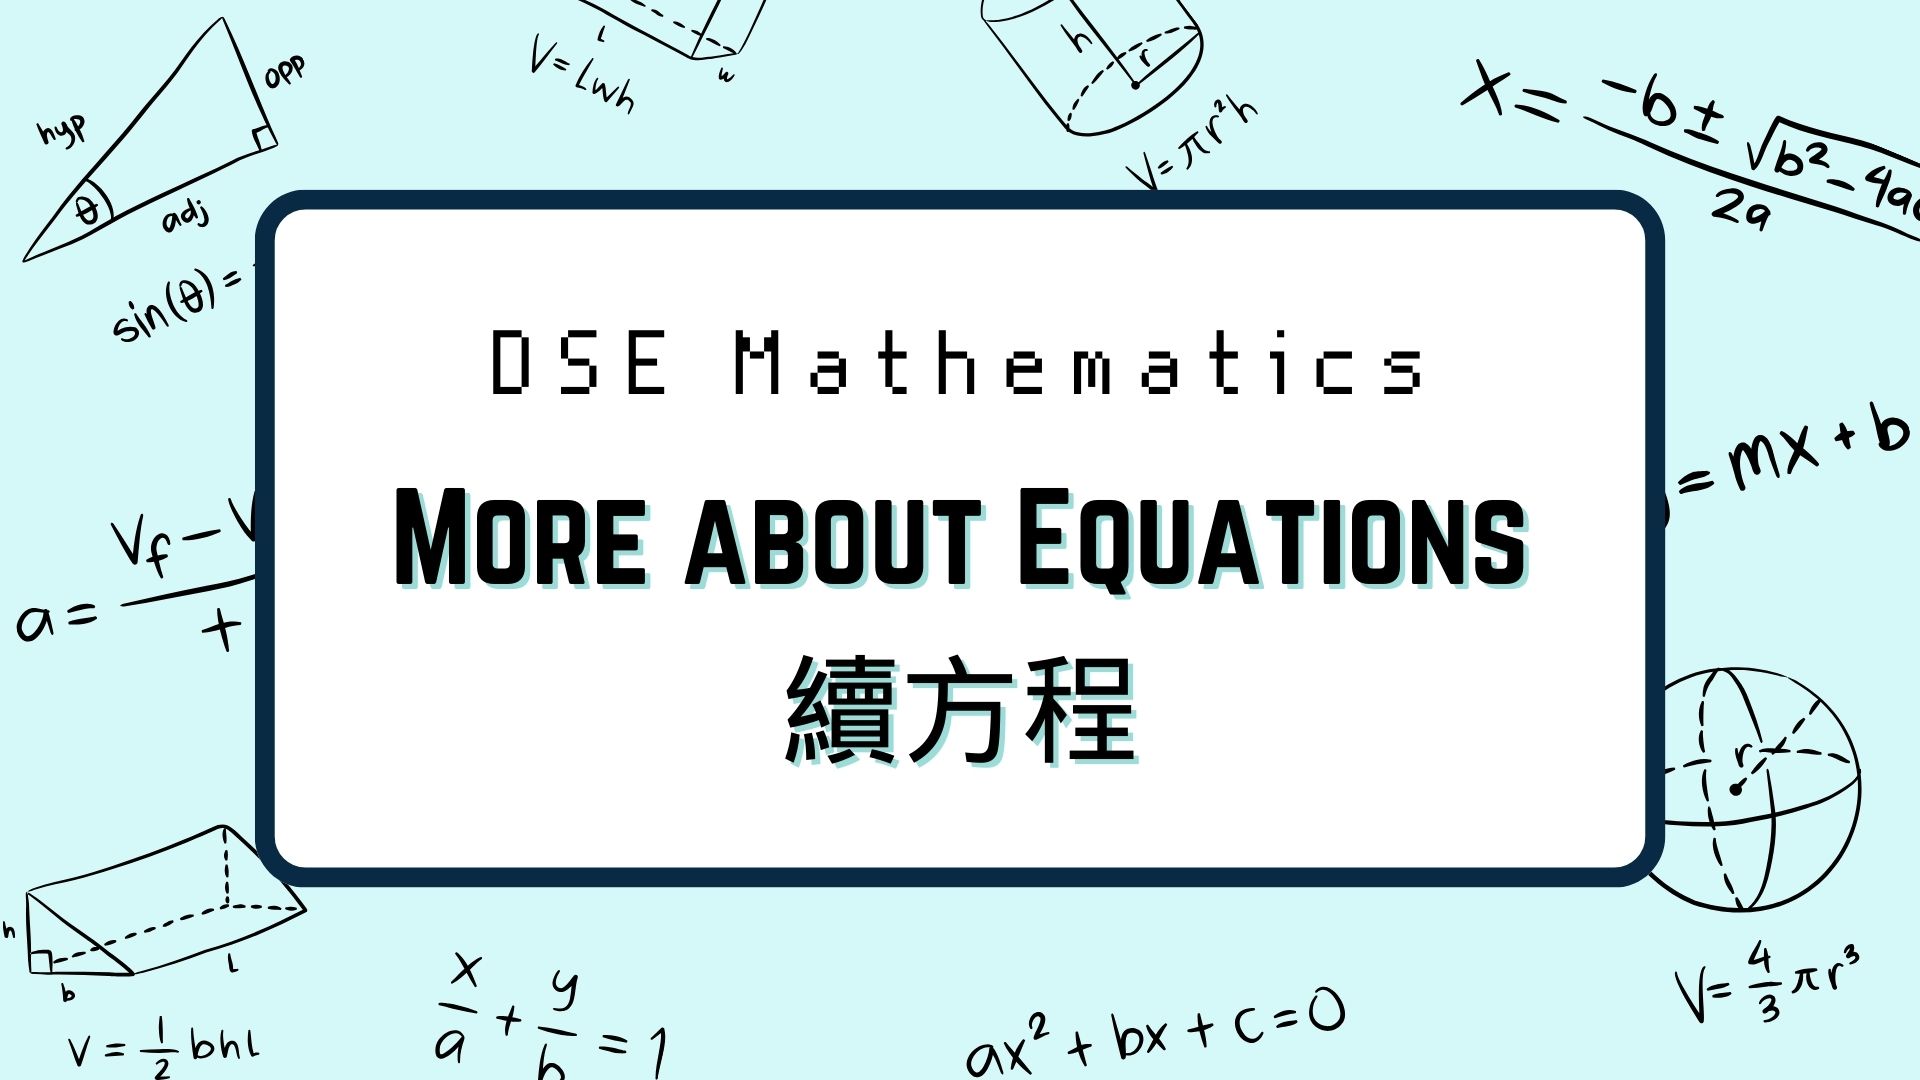 DSE數學：More about Equations 續方程